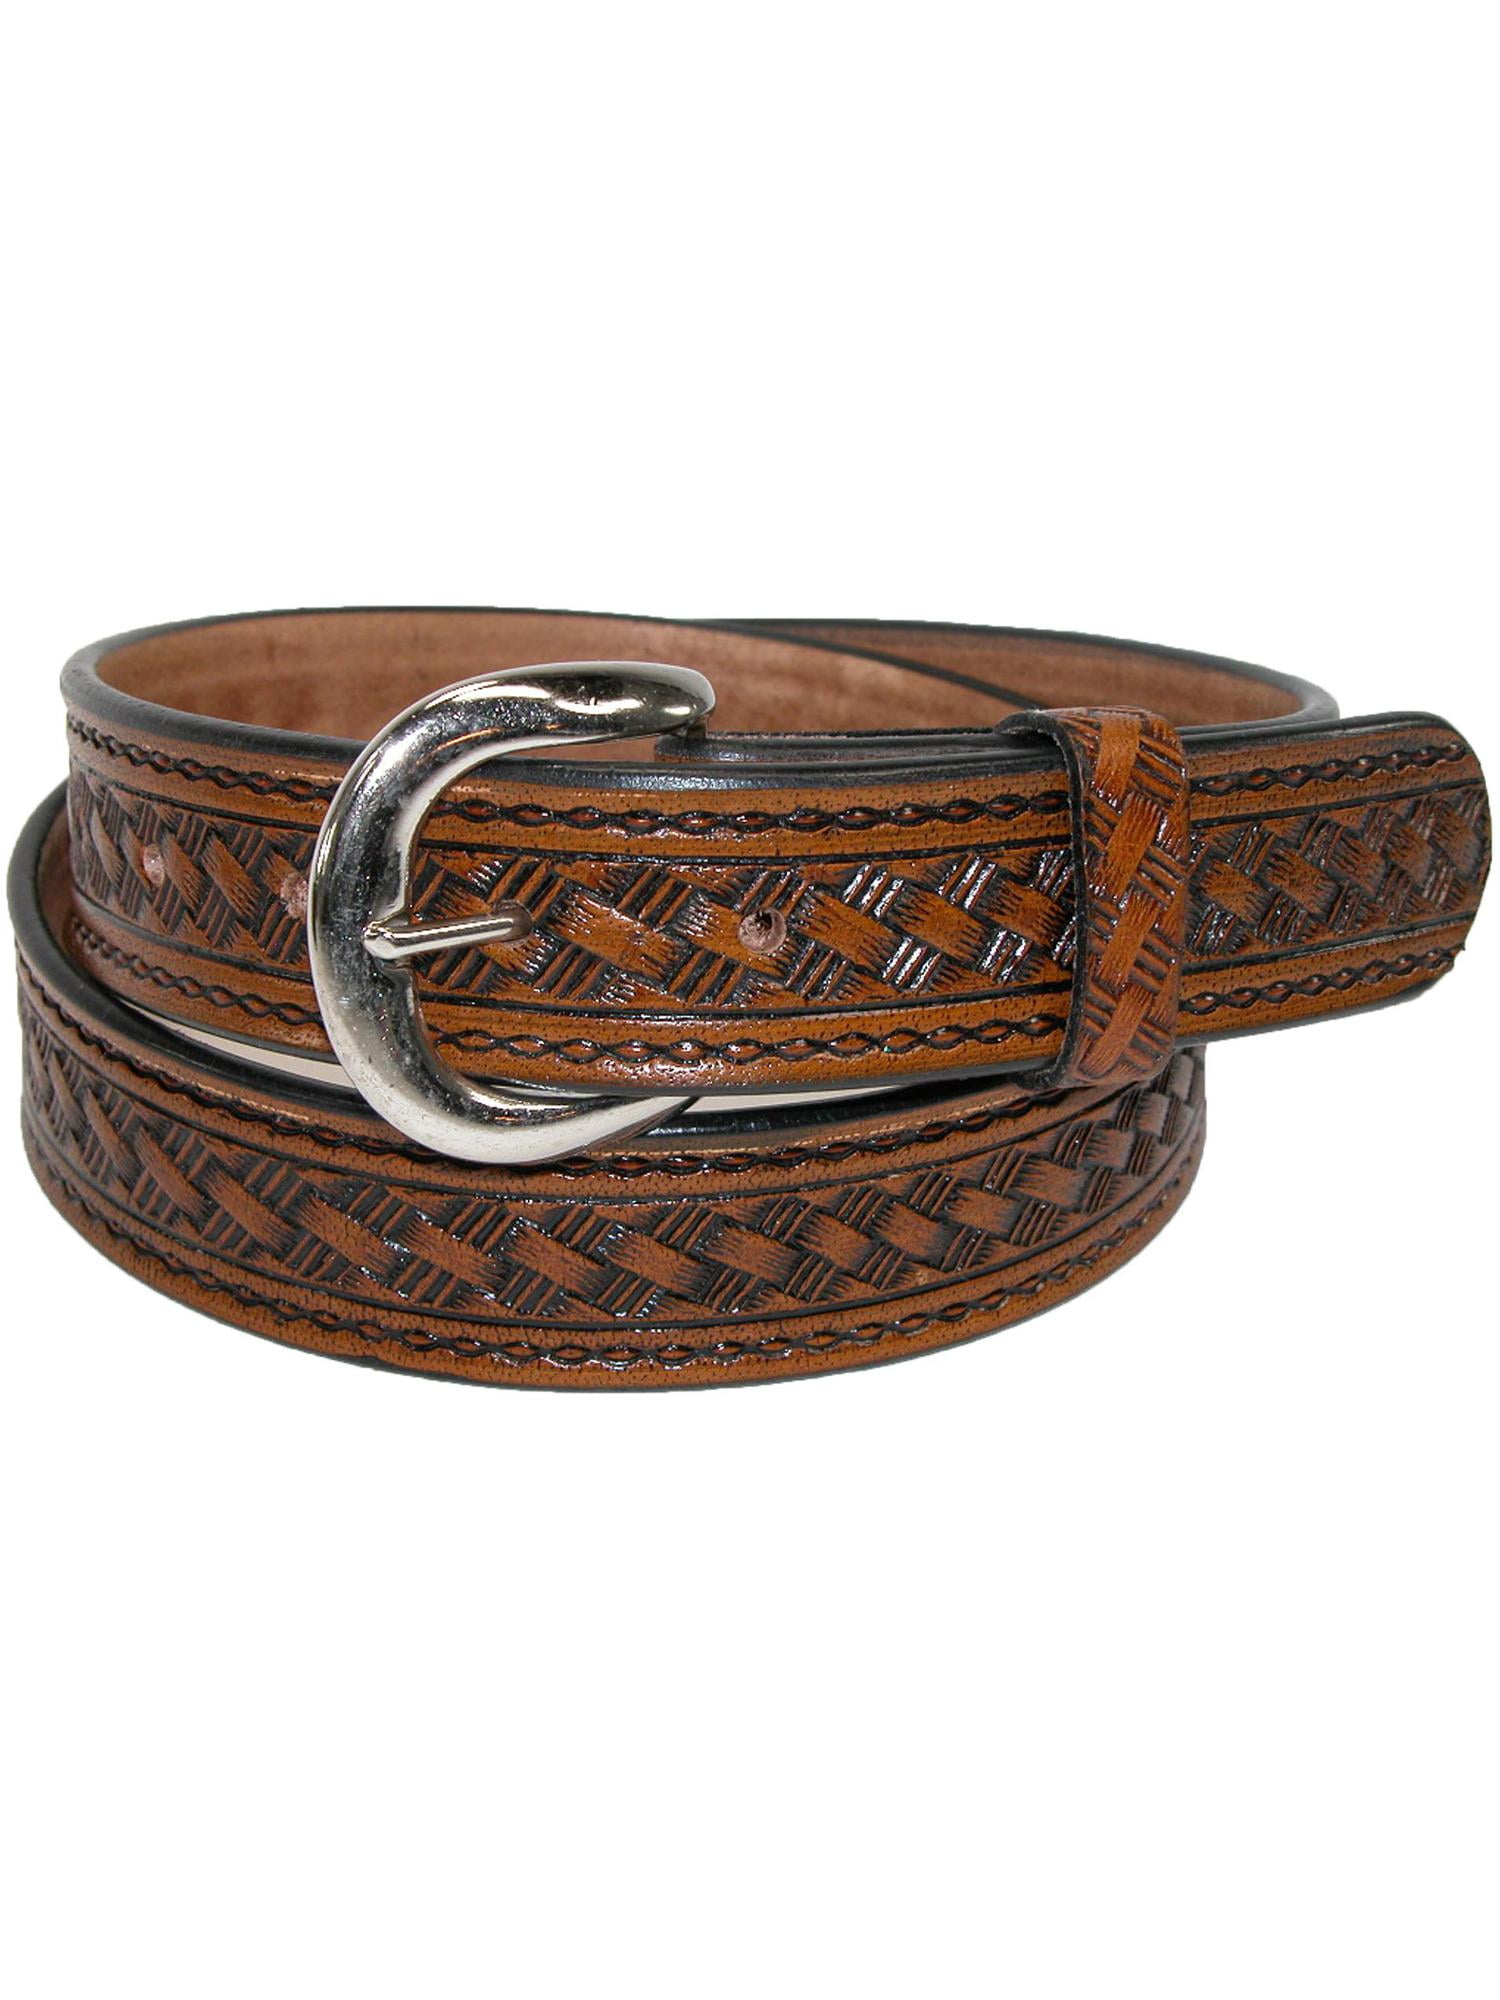 CTM - Size 48 Mens Big & Tall Leather Western Belt with Removable Buckle, Brown - www.waterandnature.org